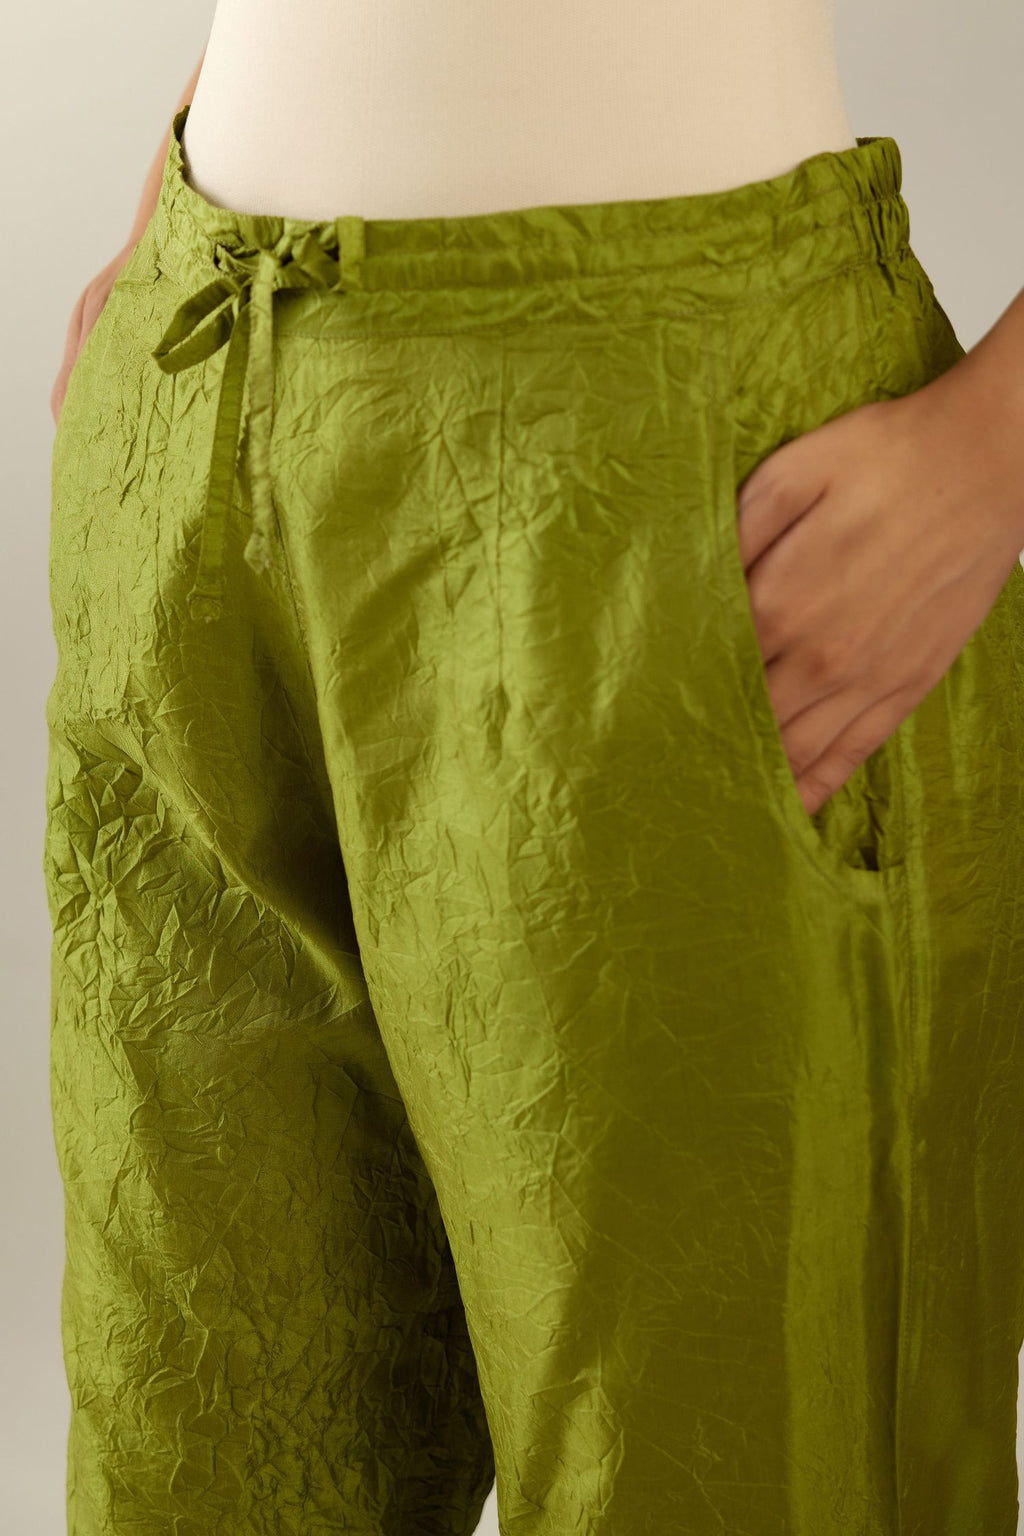 Apple green crushed silk pants with side pockets and assorted sequined butterflies till mid-calf length.